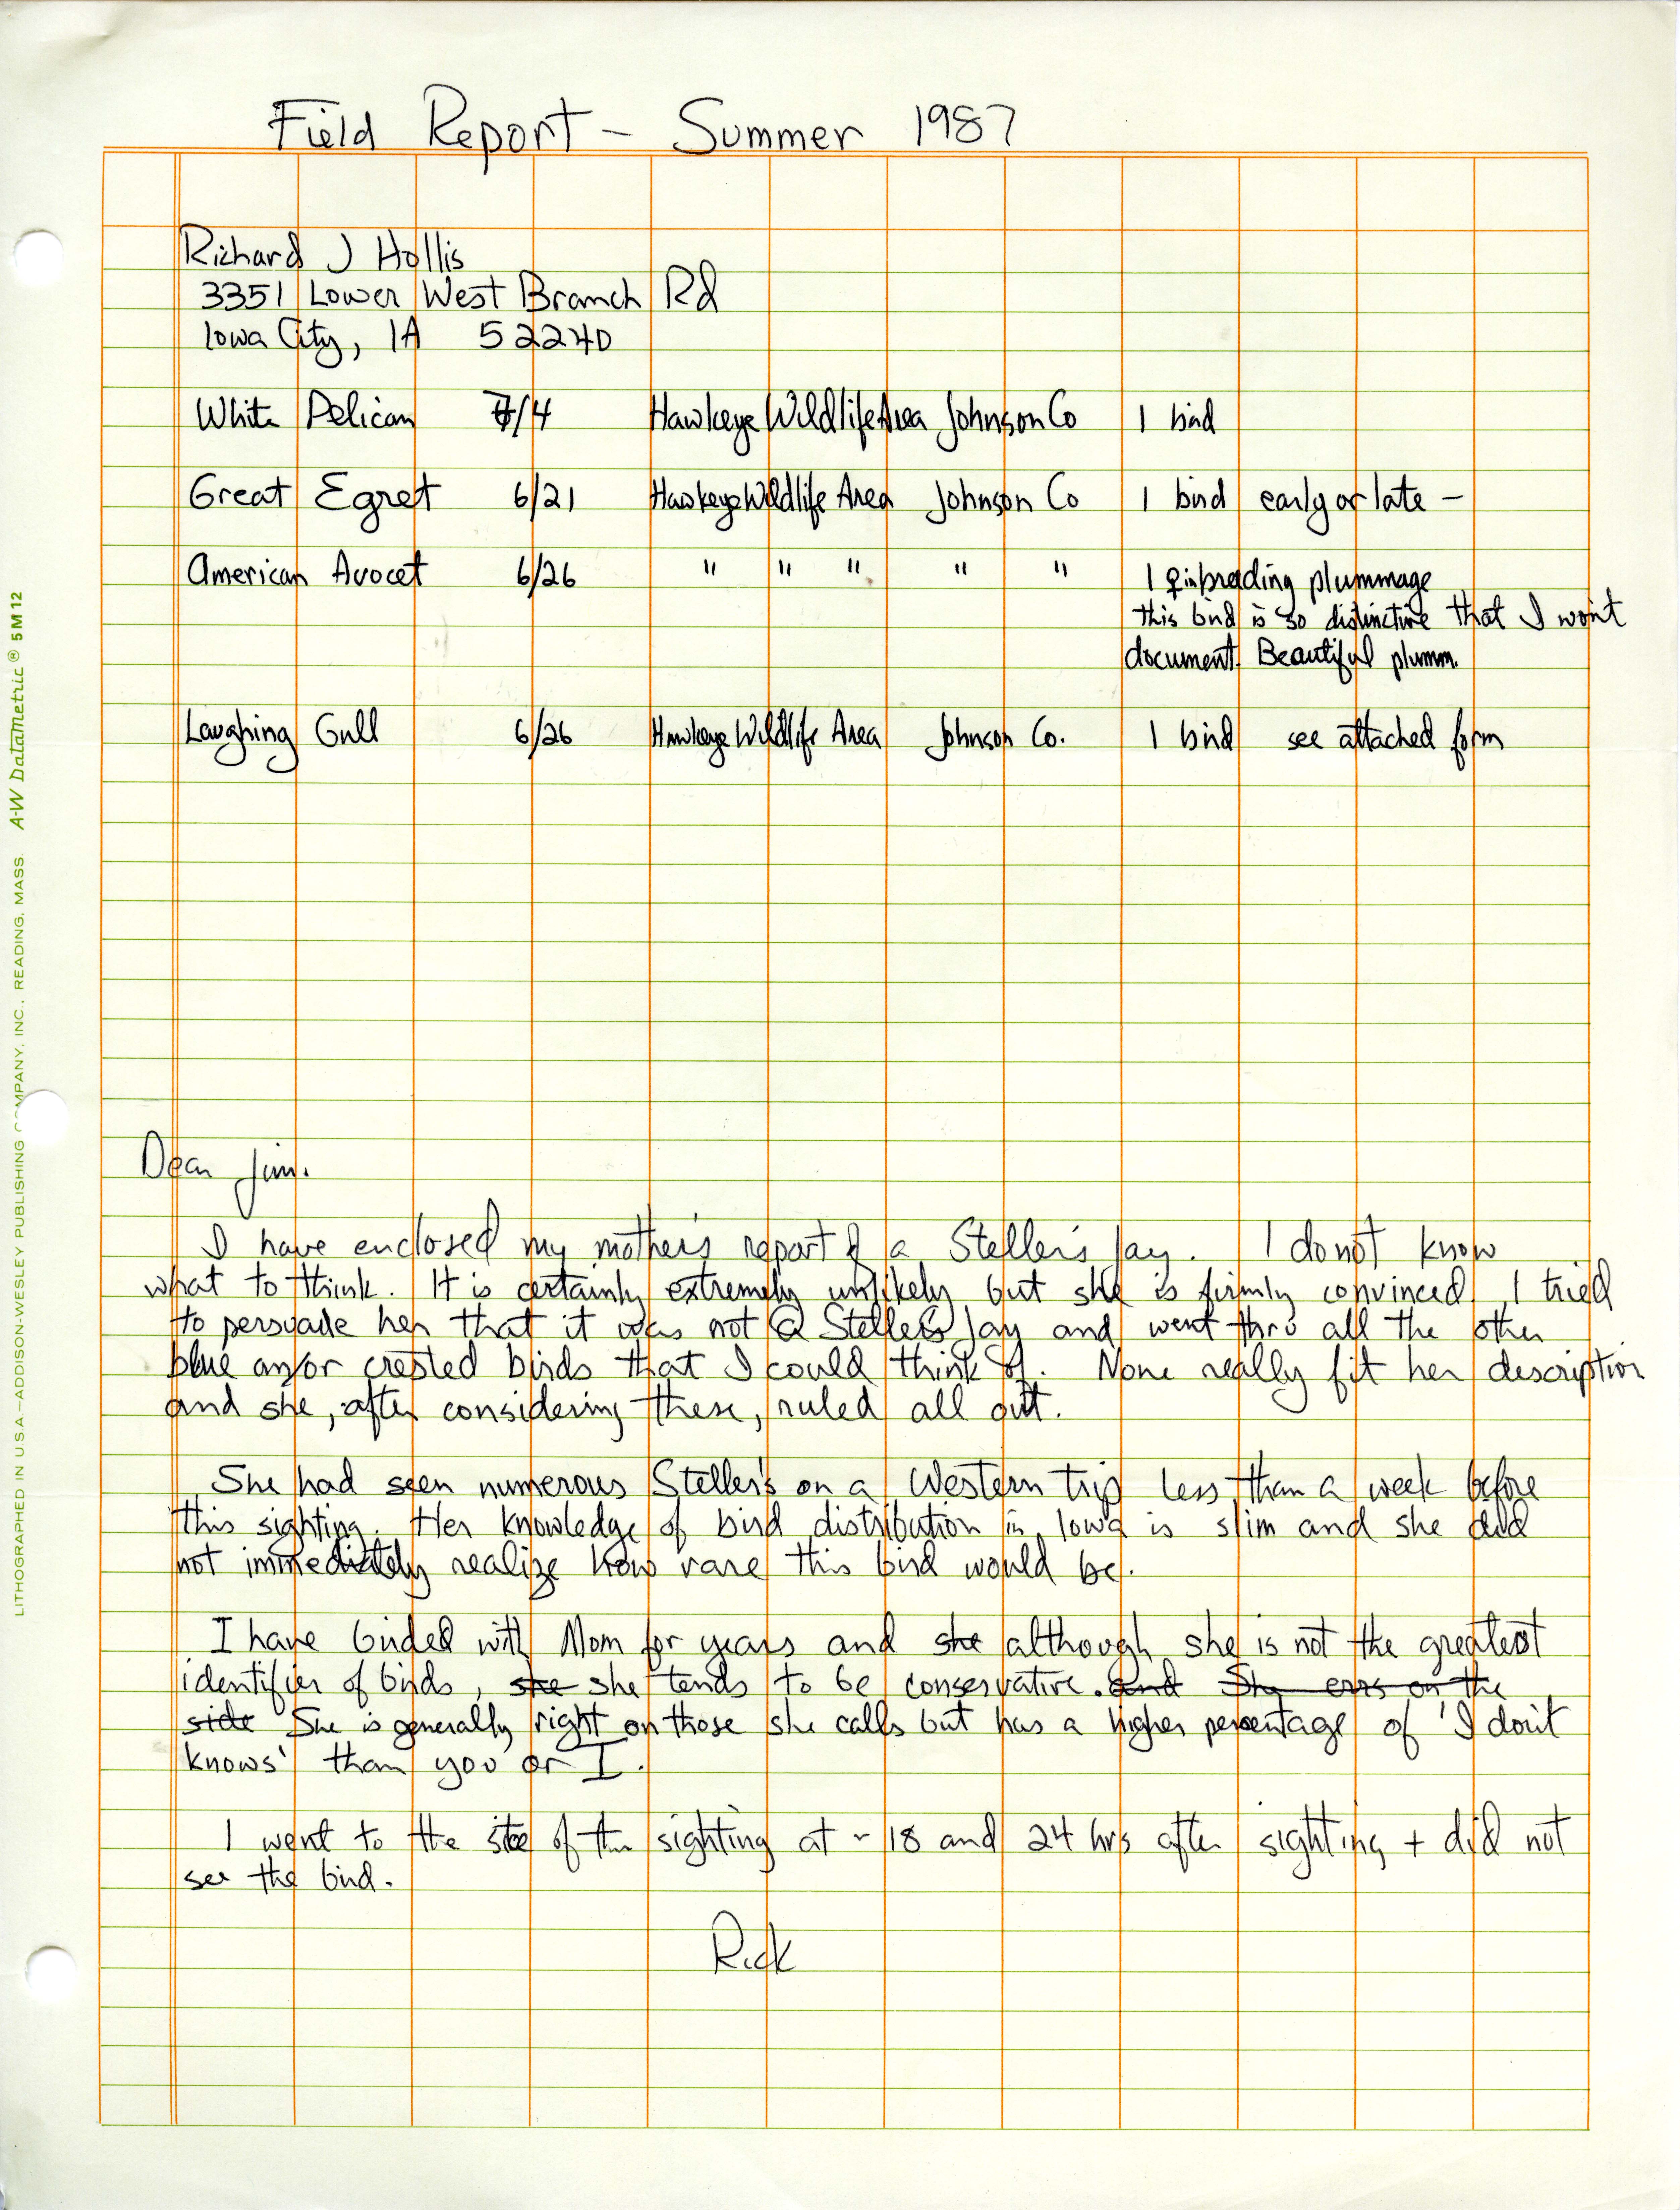 Field notes and letter to James J. Dinsmore contributed by Richard Jule Hollis, summer 1987